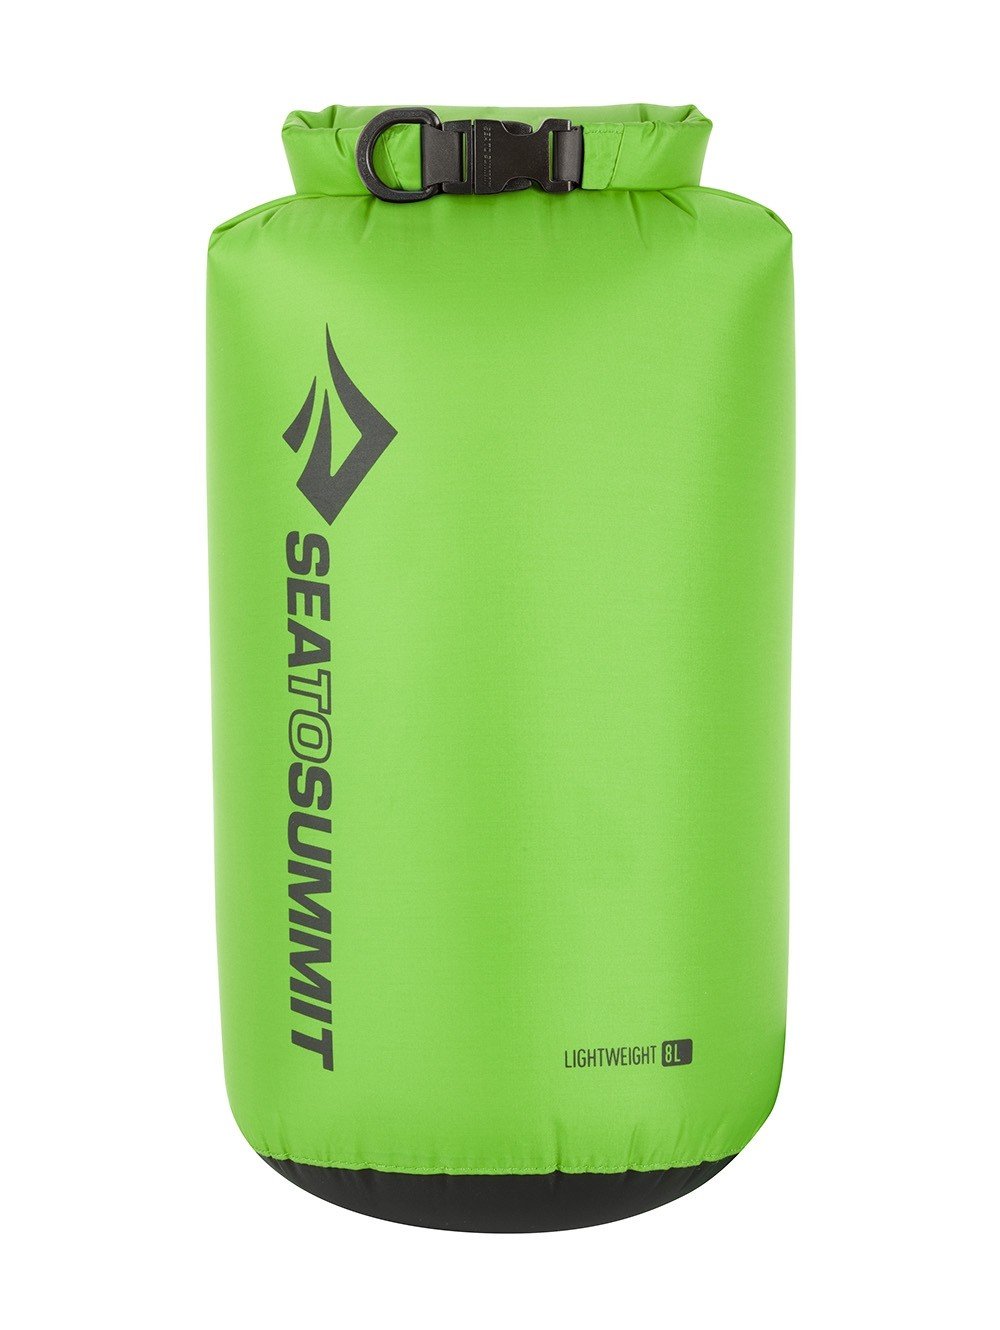 Sea To Summit Lightweight 70D 8 Litres Dry Sack Bags, Packs and Cases Sea To Summit Green Tactical Gear Supplier Tactical Distributors Australia